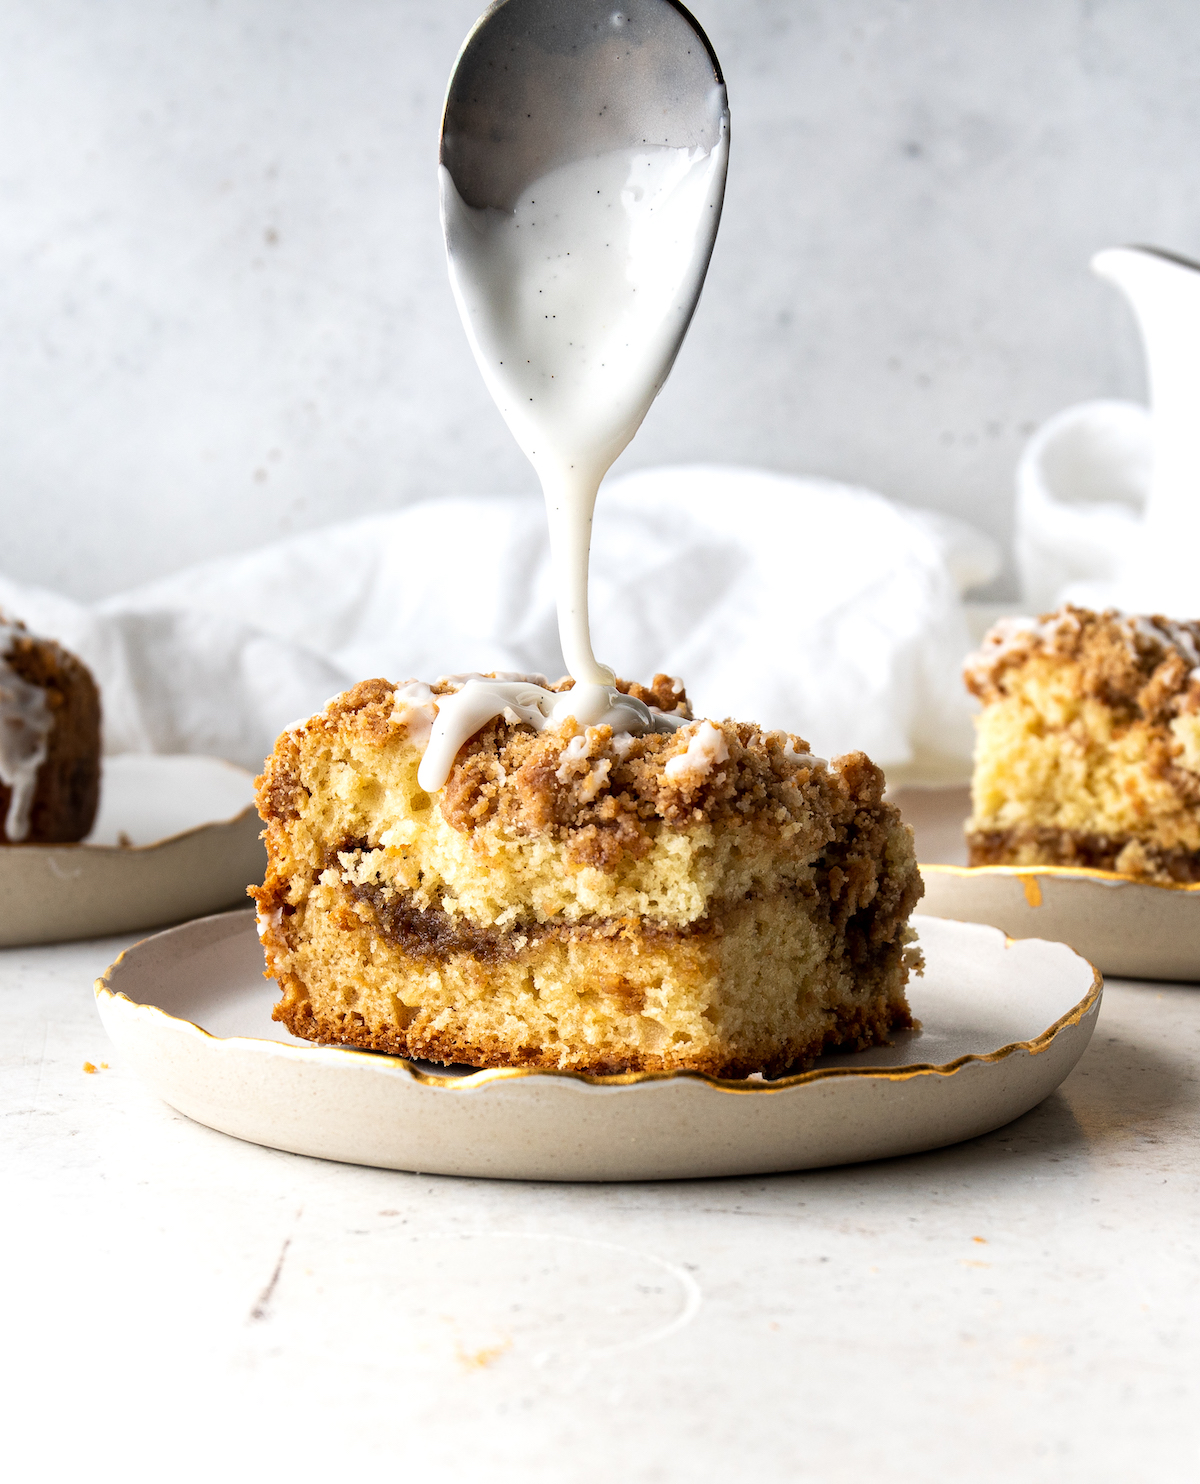 A coffee cake getting vanilla bean drizzle over the streusel top.